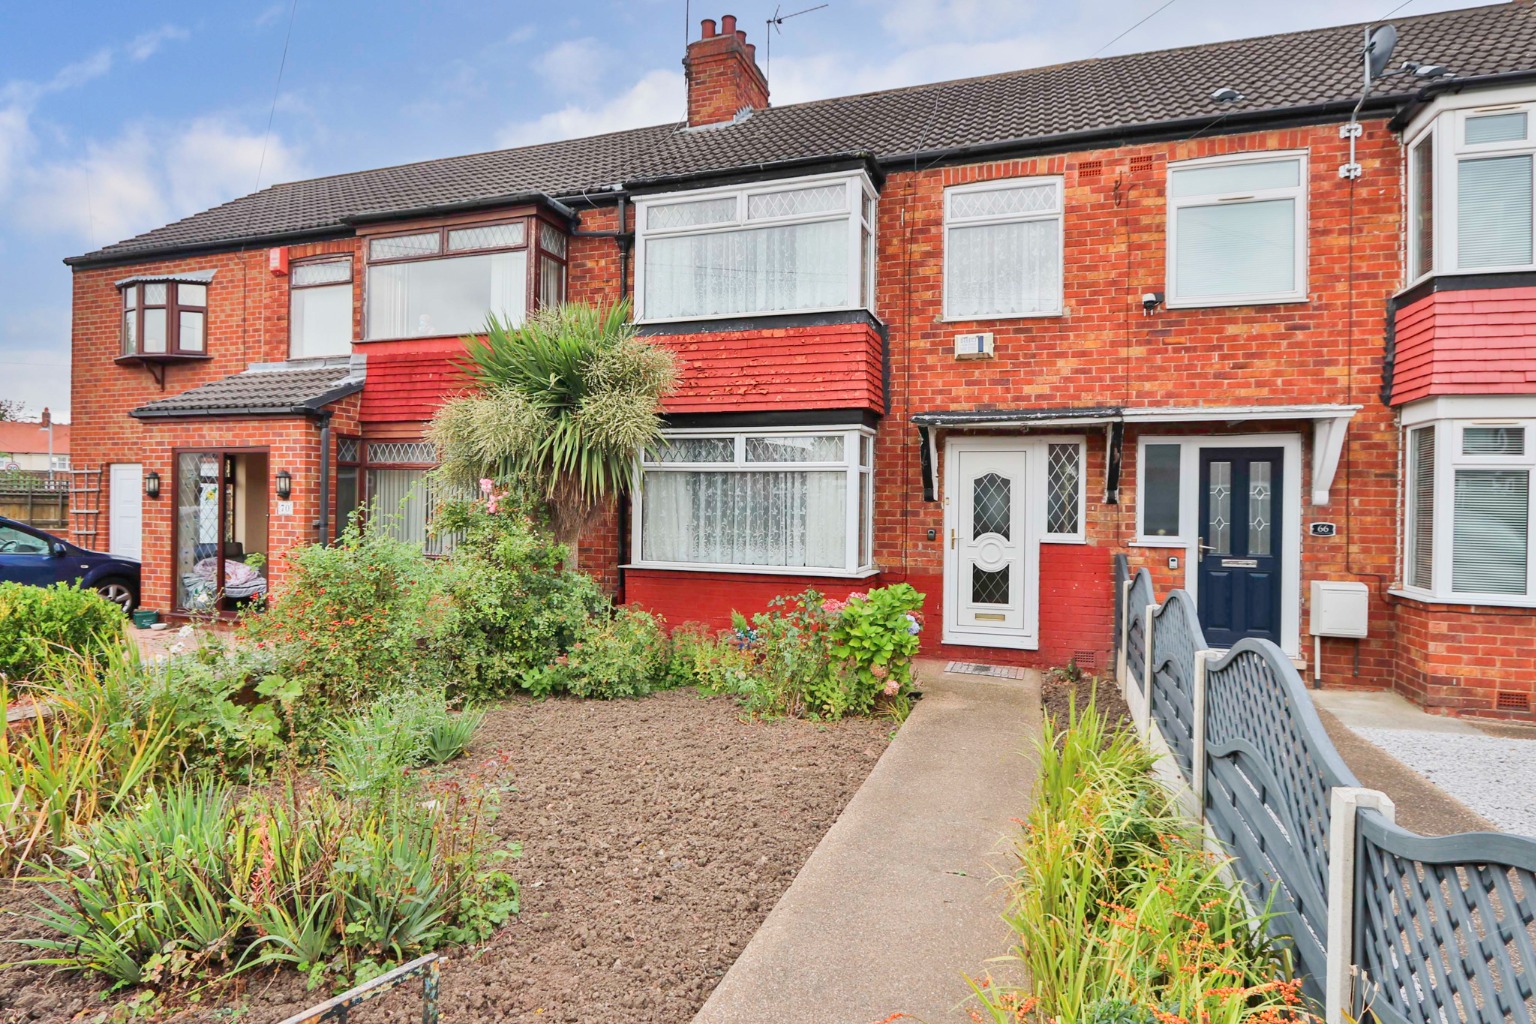 3 bed terraced house for sale - Property Image 1